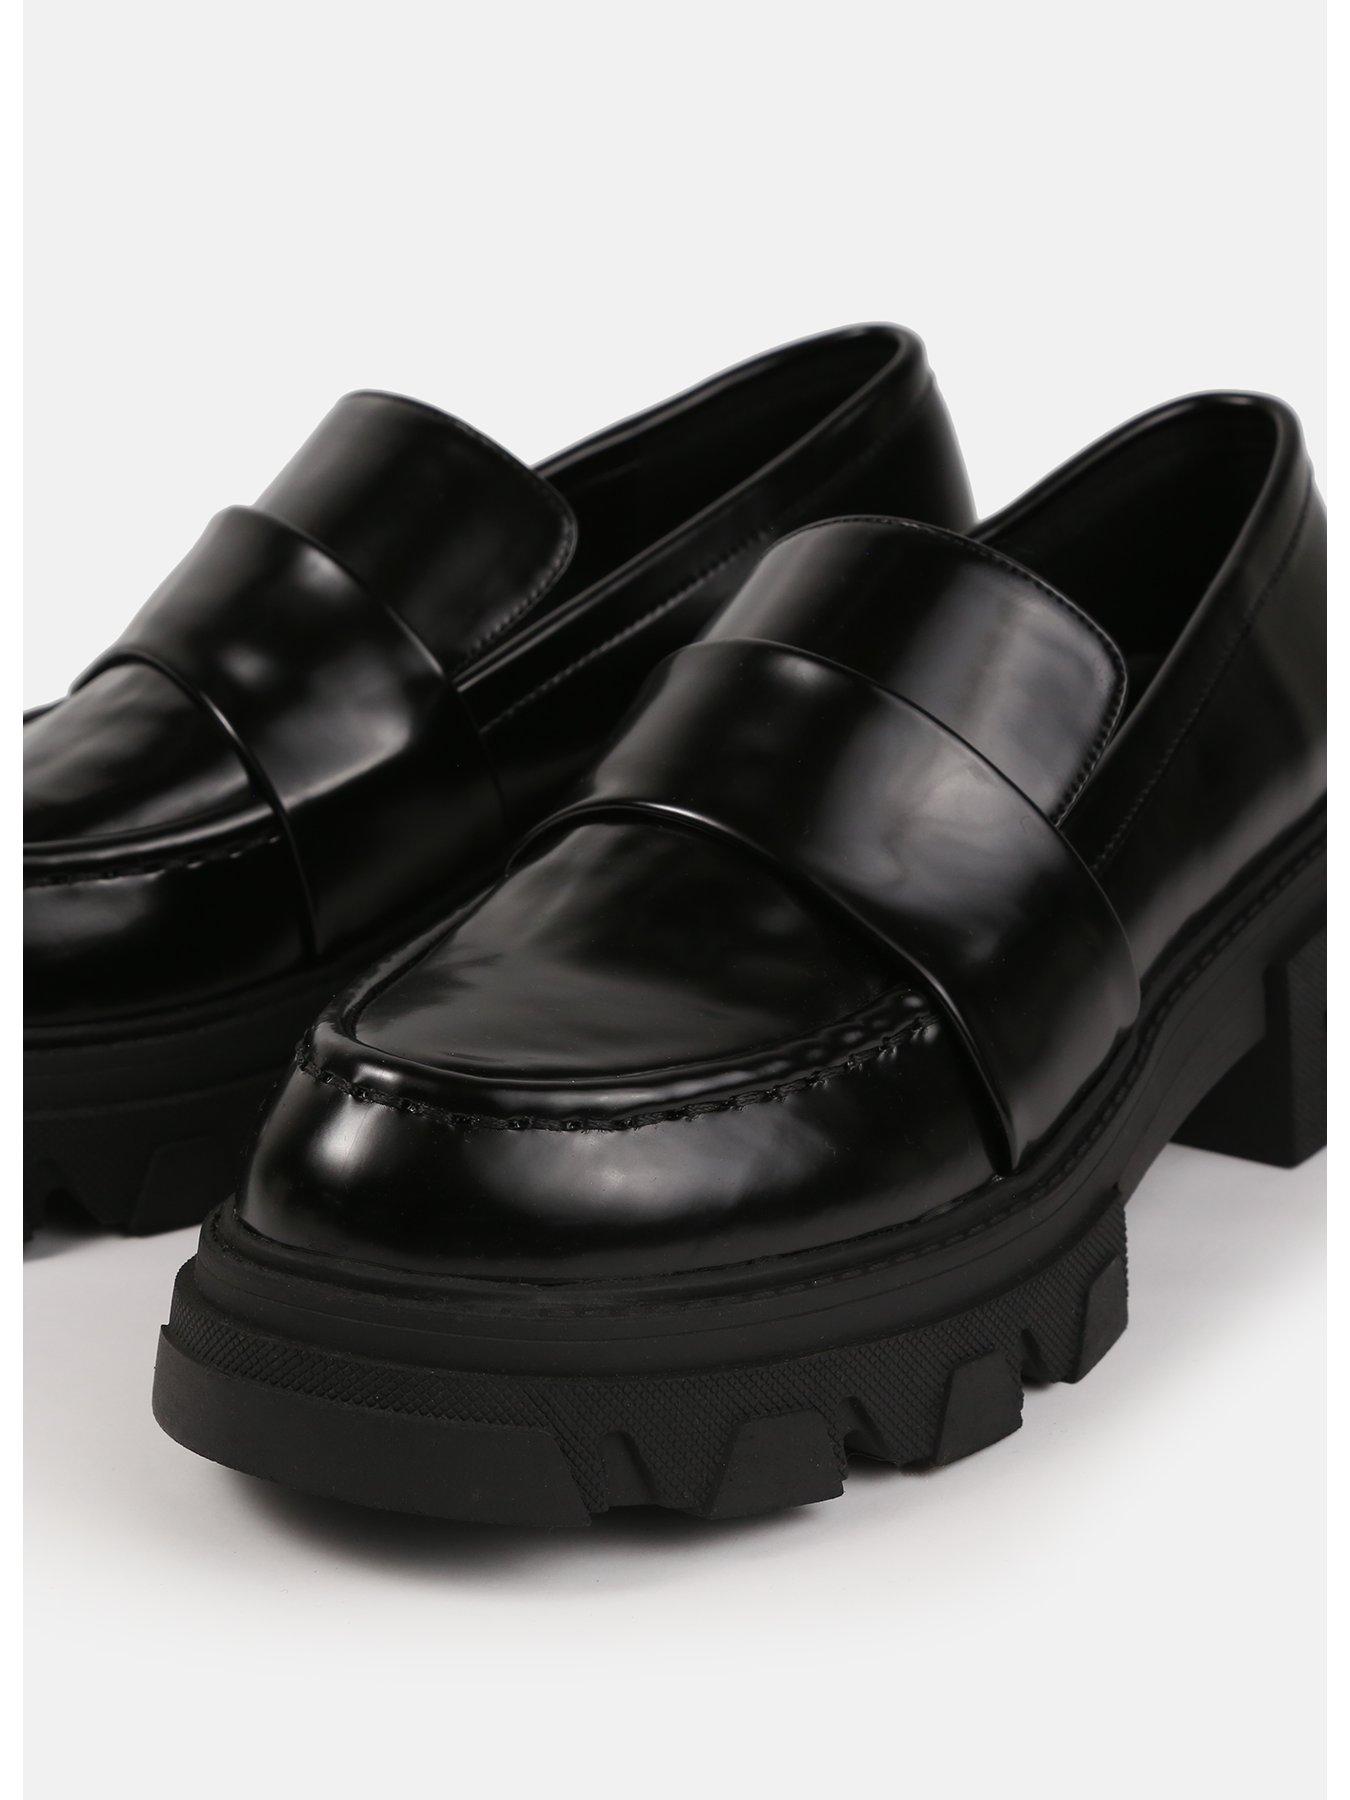 Details about   Mens Pumps Slip on Loafers Breathable Flat Business Leisure Faux Leather Shoes D 